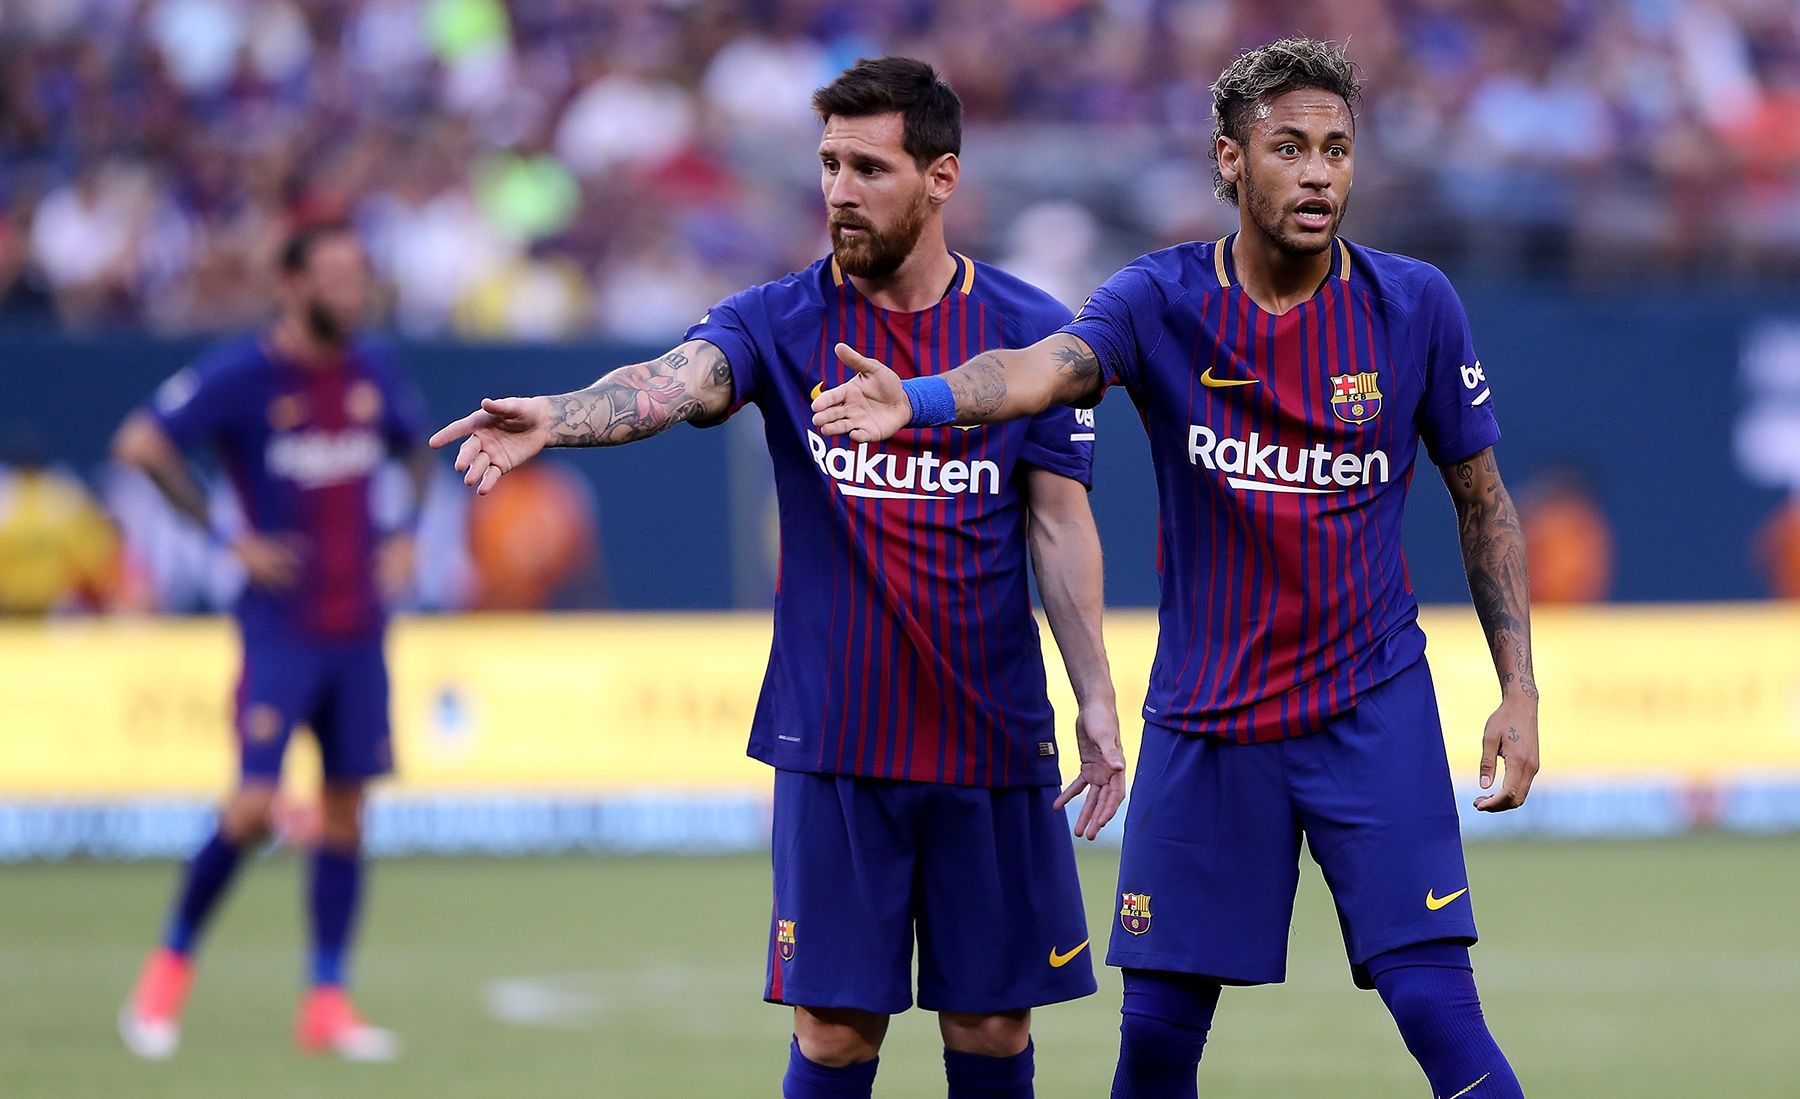 Neymar Jr And Leo Messi, before kicking a fault with FC Barcelona